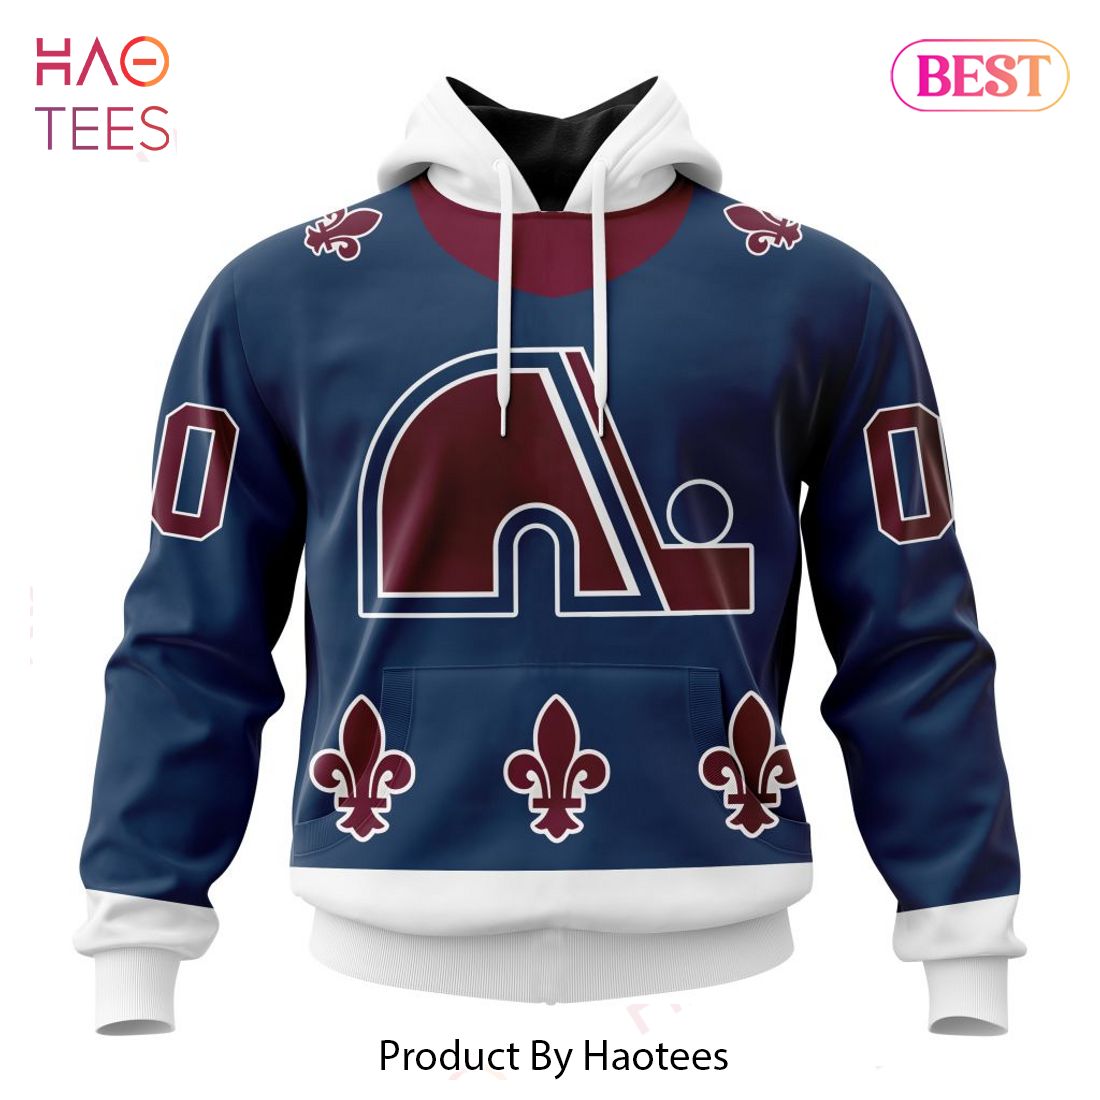 BEST NHL Colorado Avalanche Special Reverse Retro Redesign 3D Hoodie